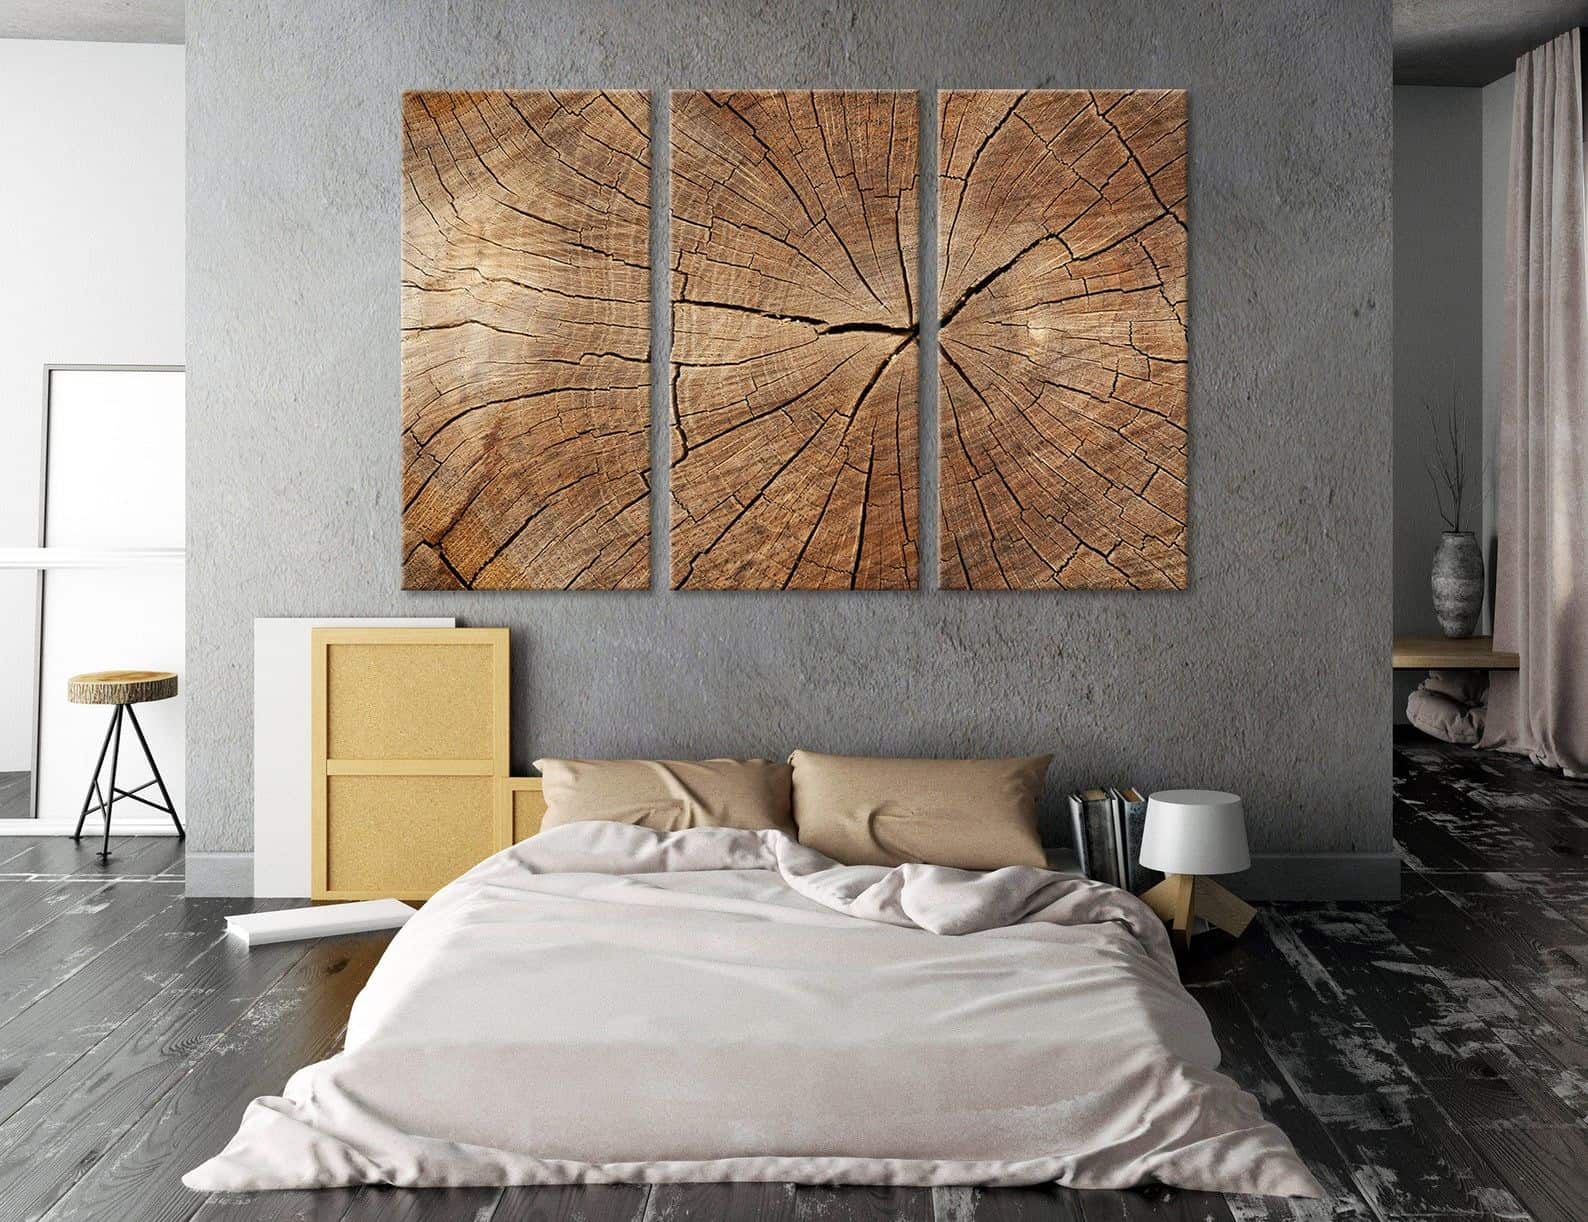  Wood Texture Wall Decor available on Etsy. 